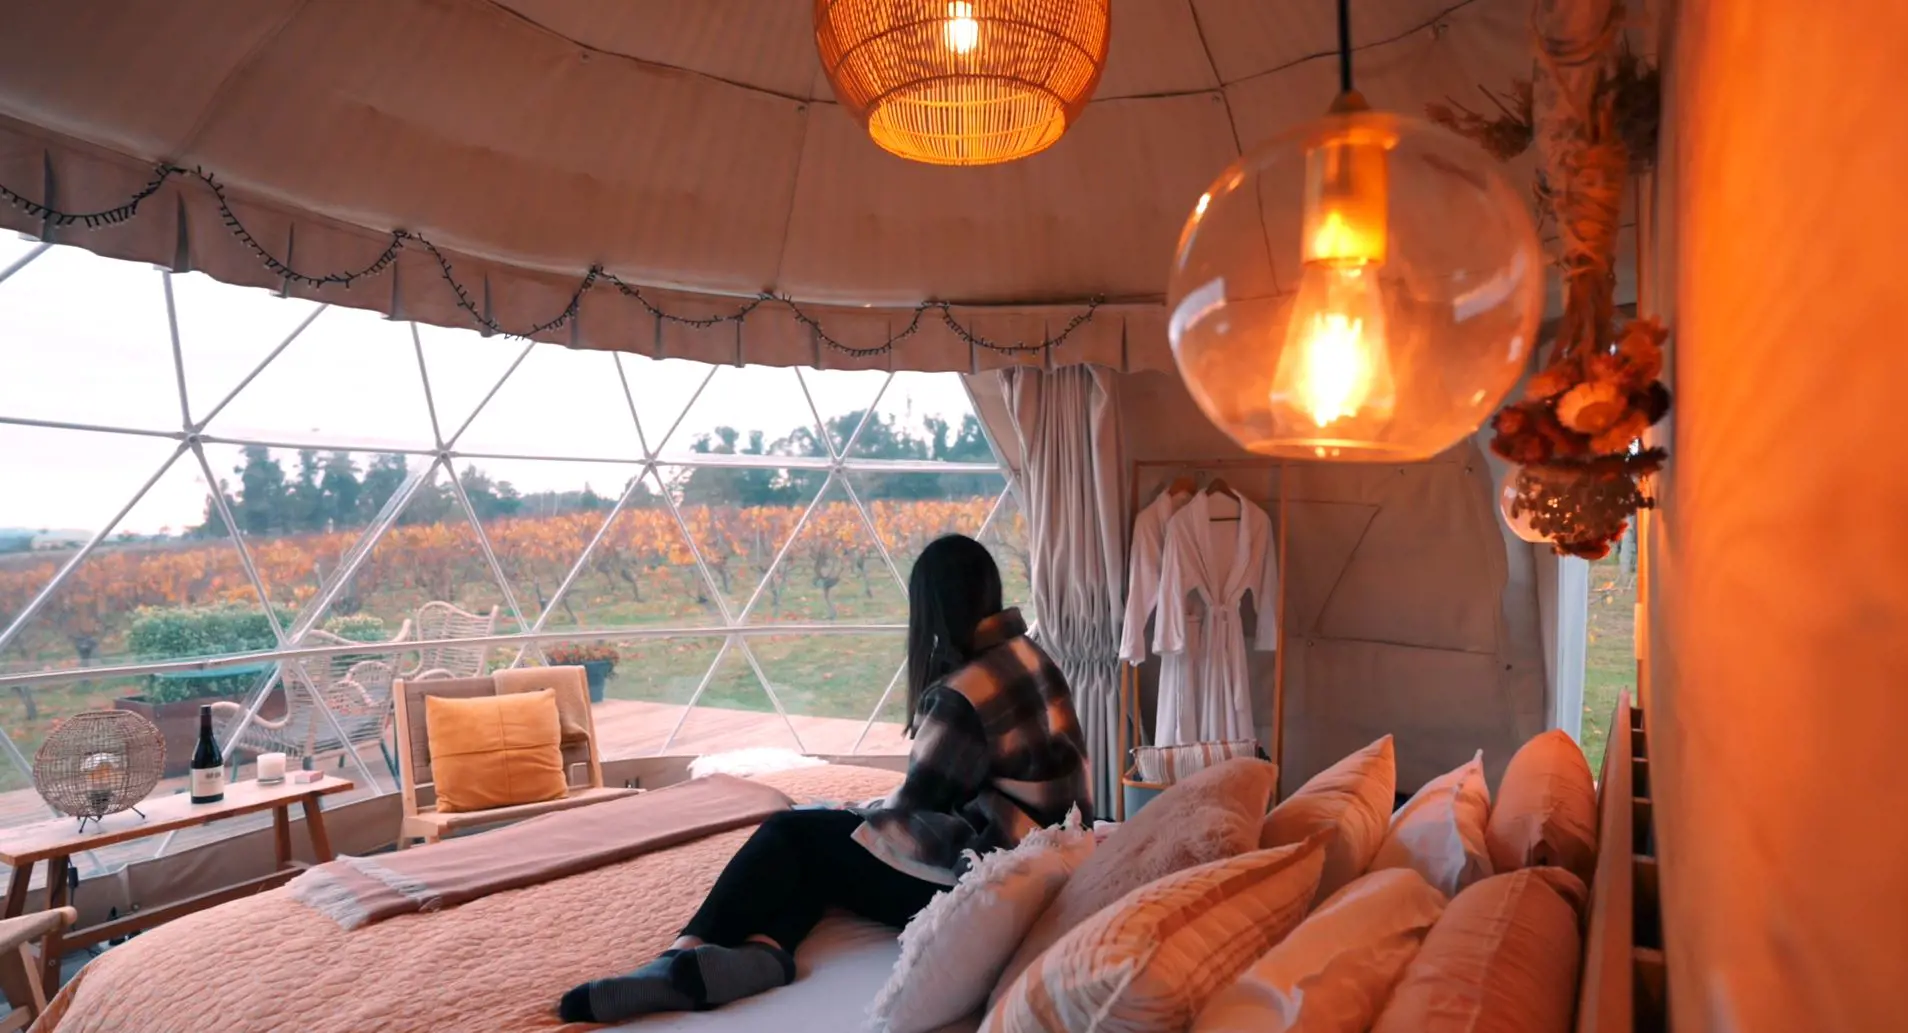 A woman sits on a large bed inside a dome-shaped tent with windows overlooking a vineyard.